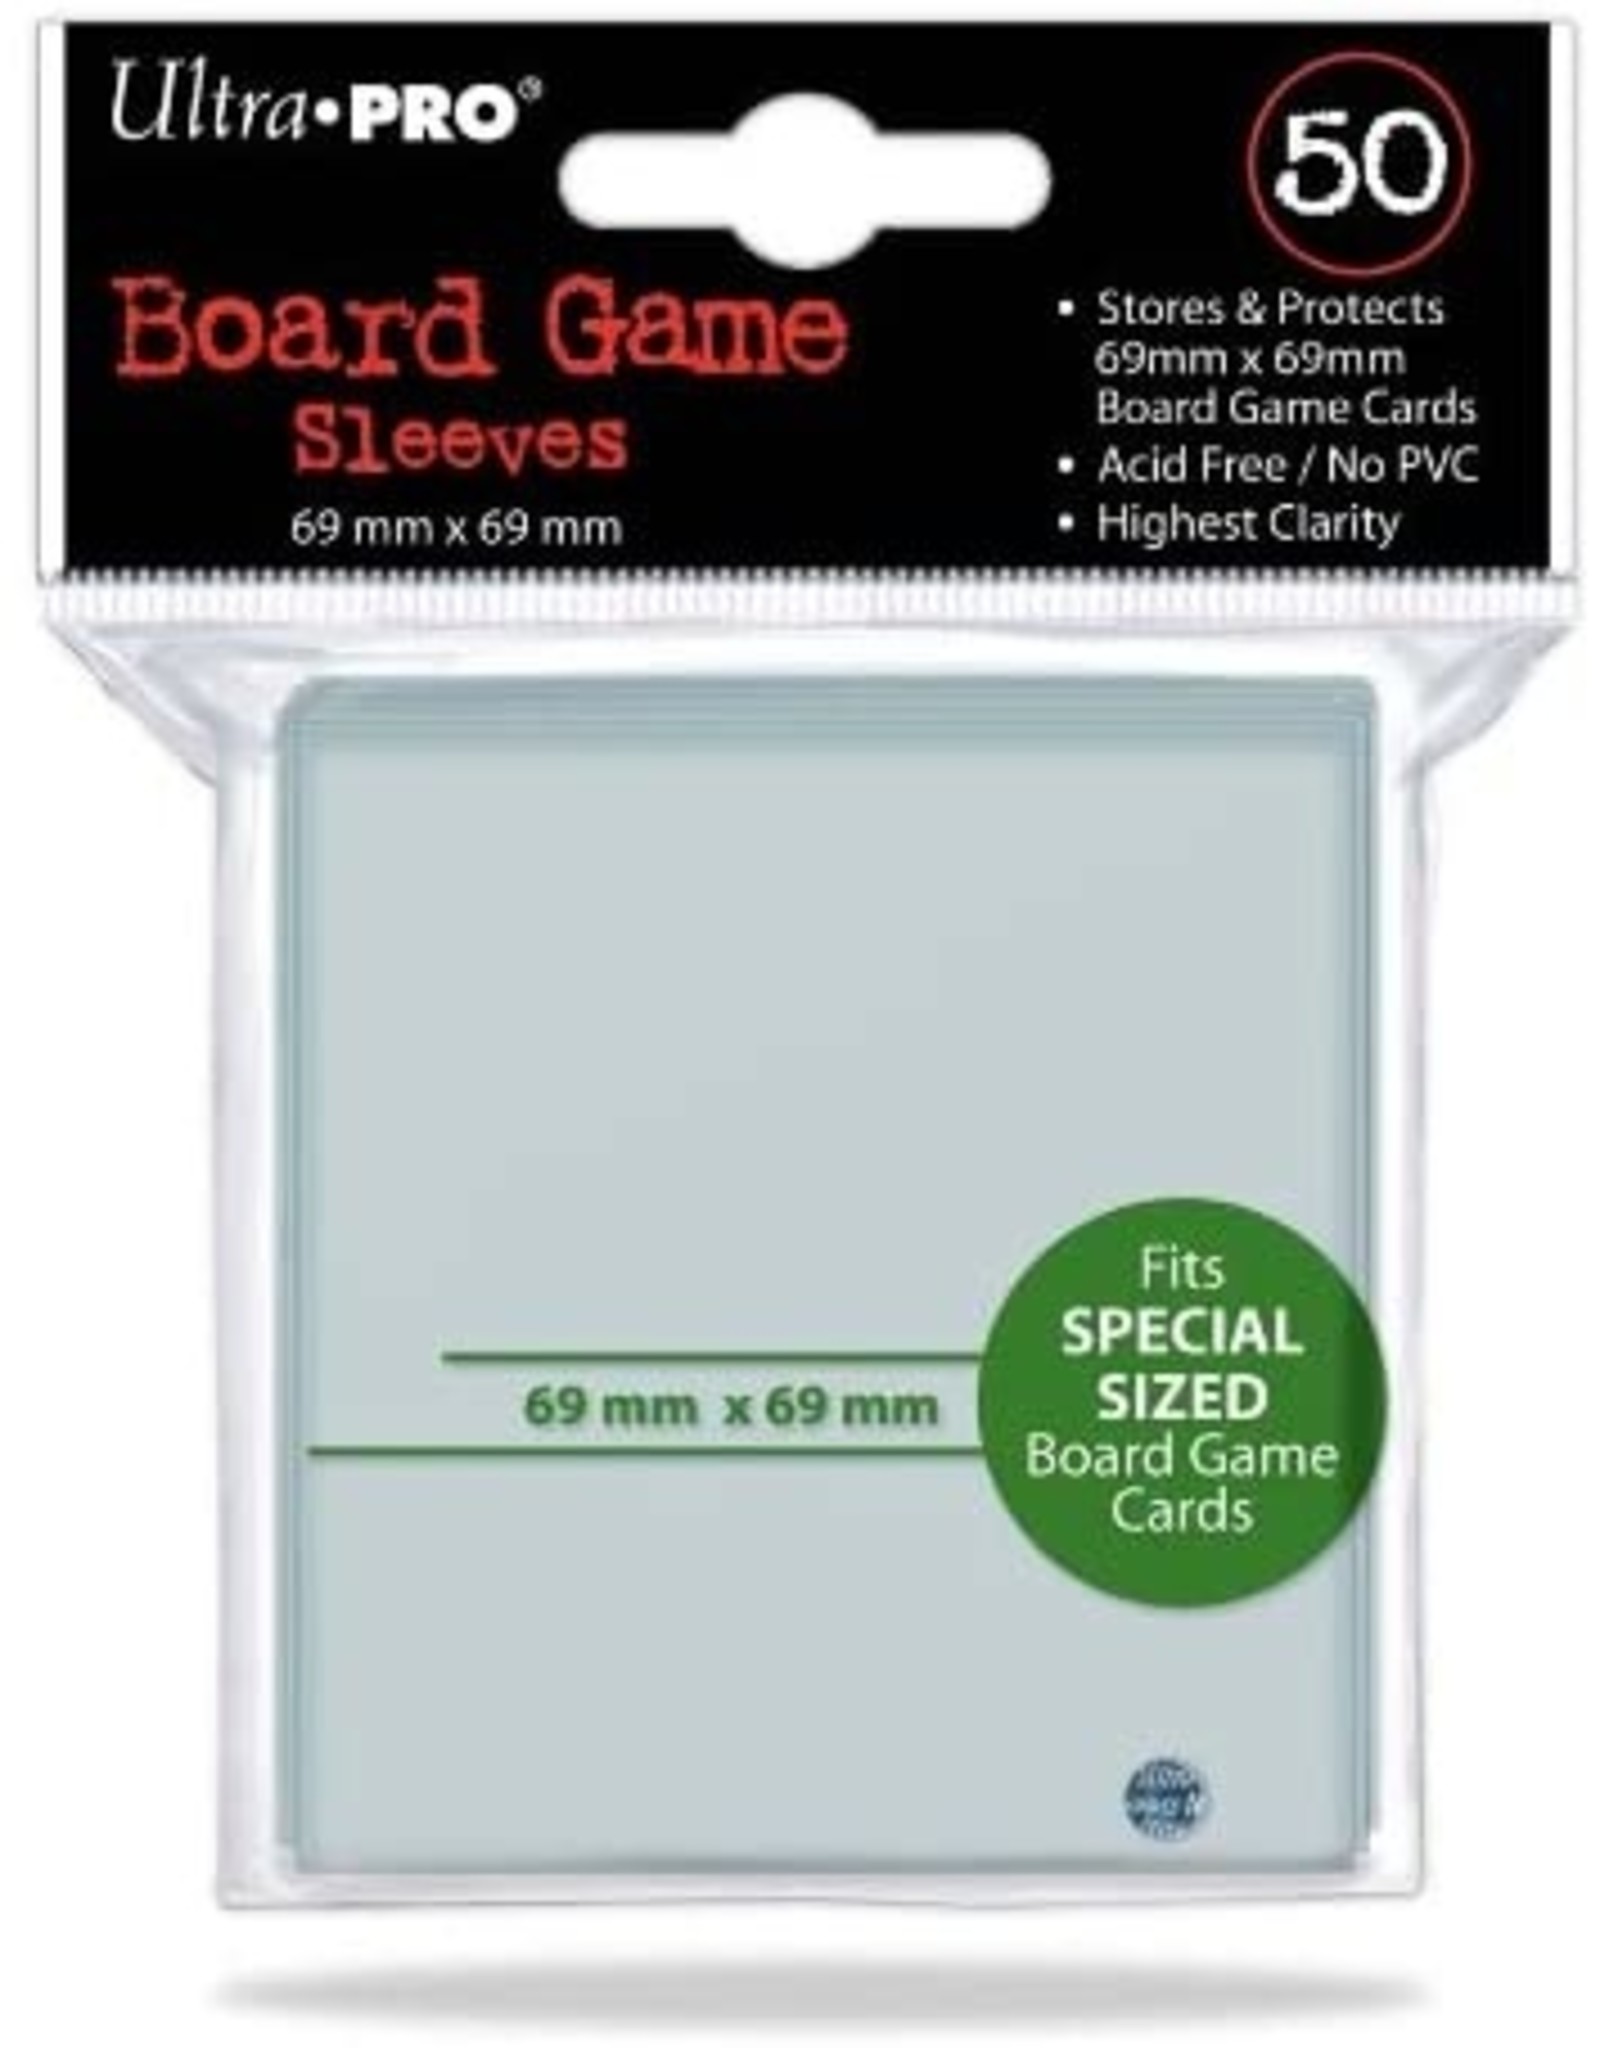 Ultra Pro Board Game Sleeves 69x69mm 50ct